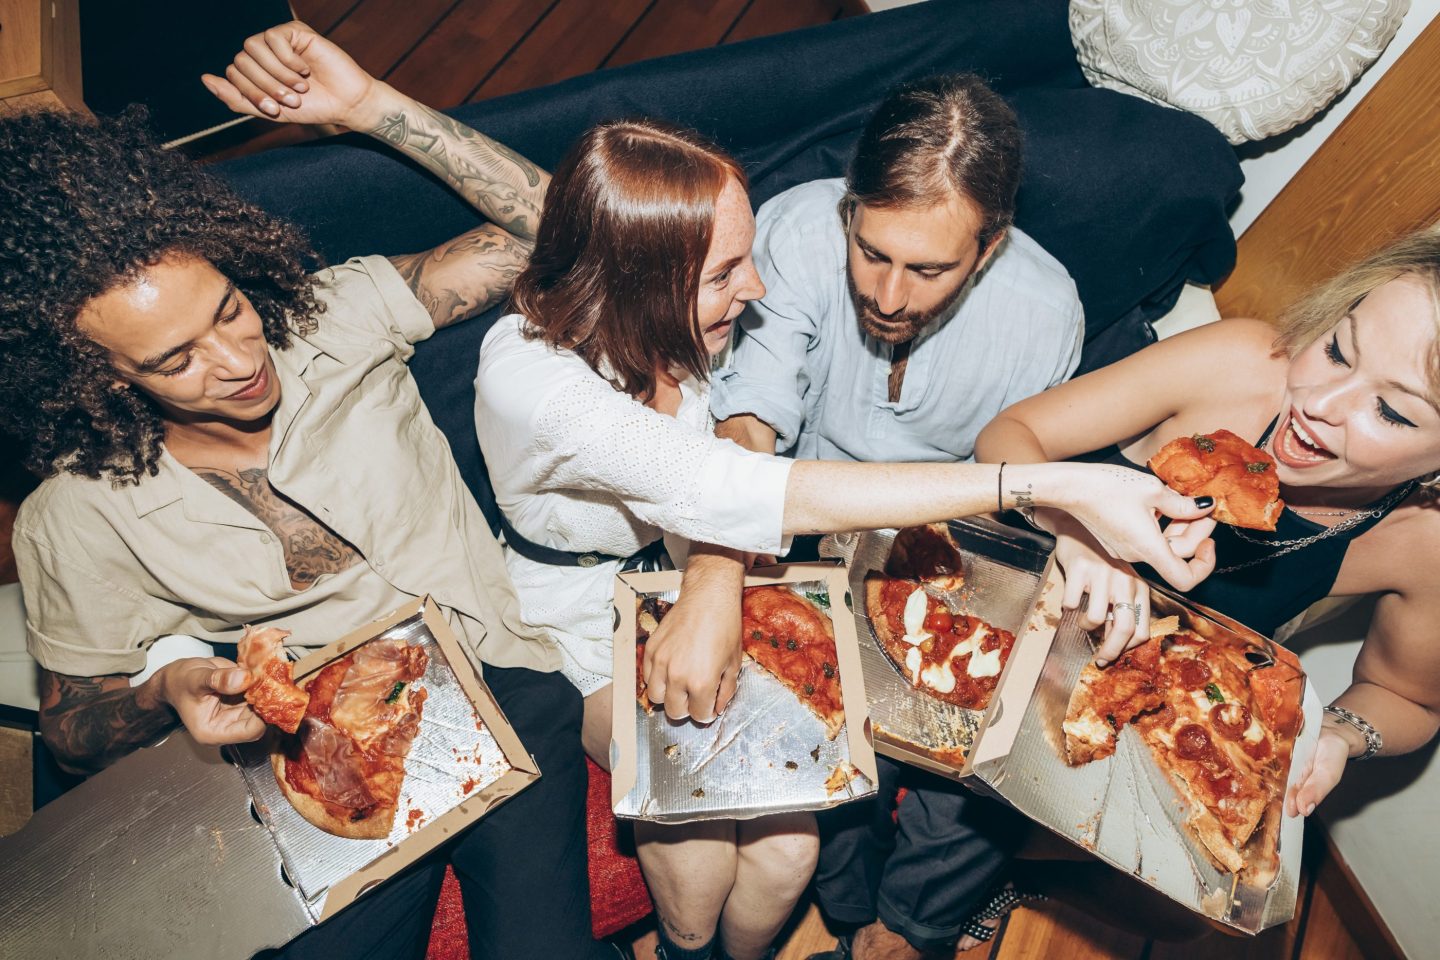 Several people eating pizza